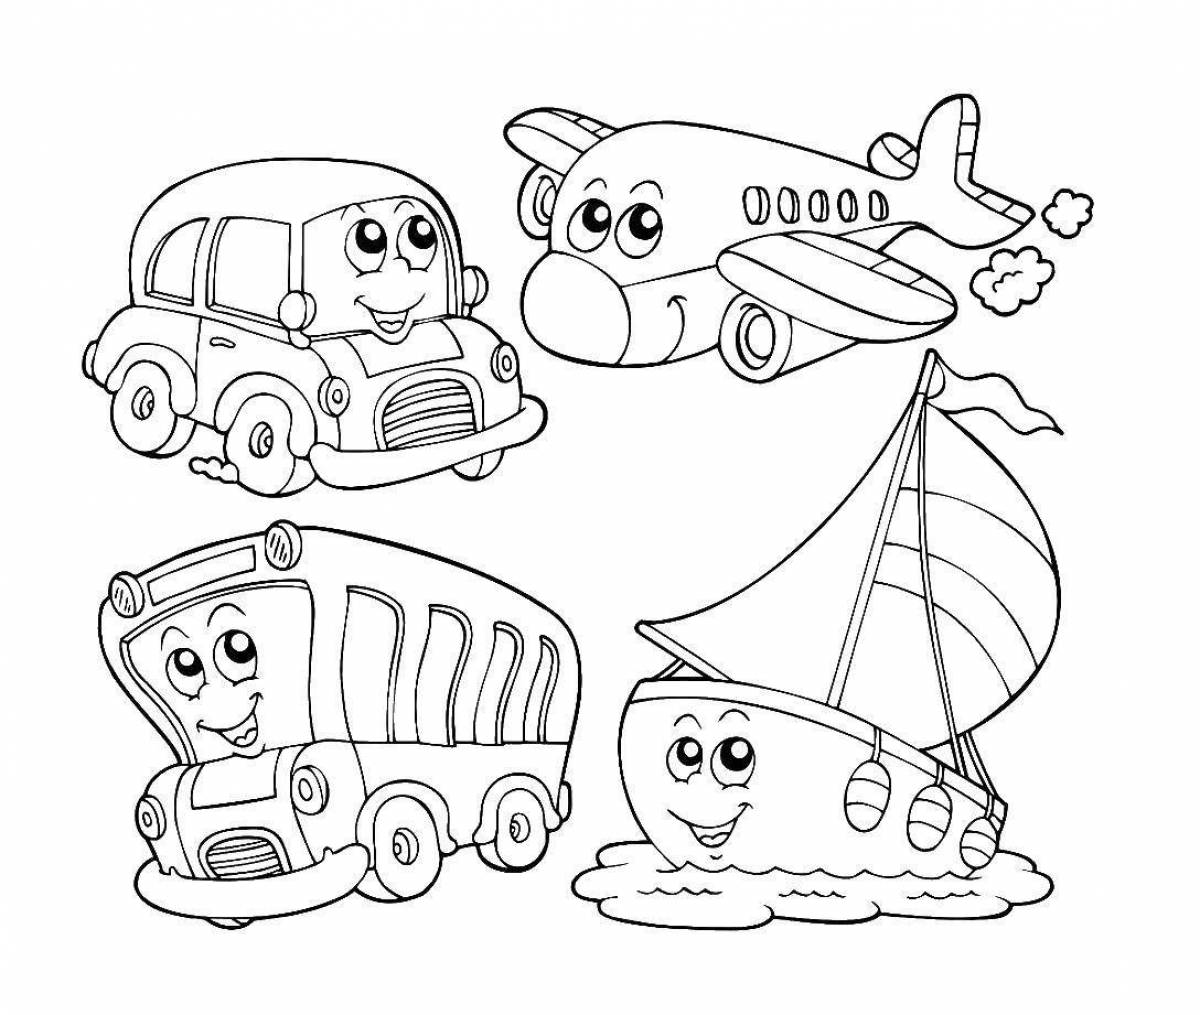 Dynamic transport coloring book for kids